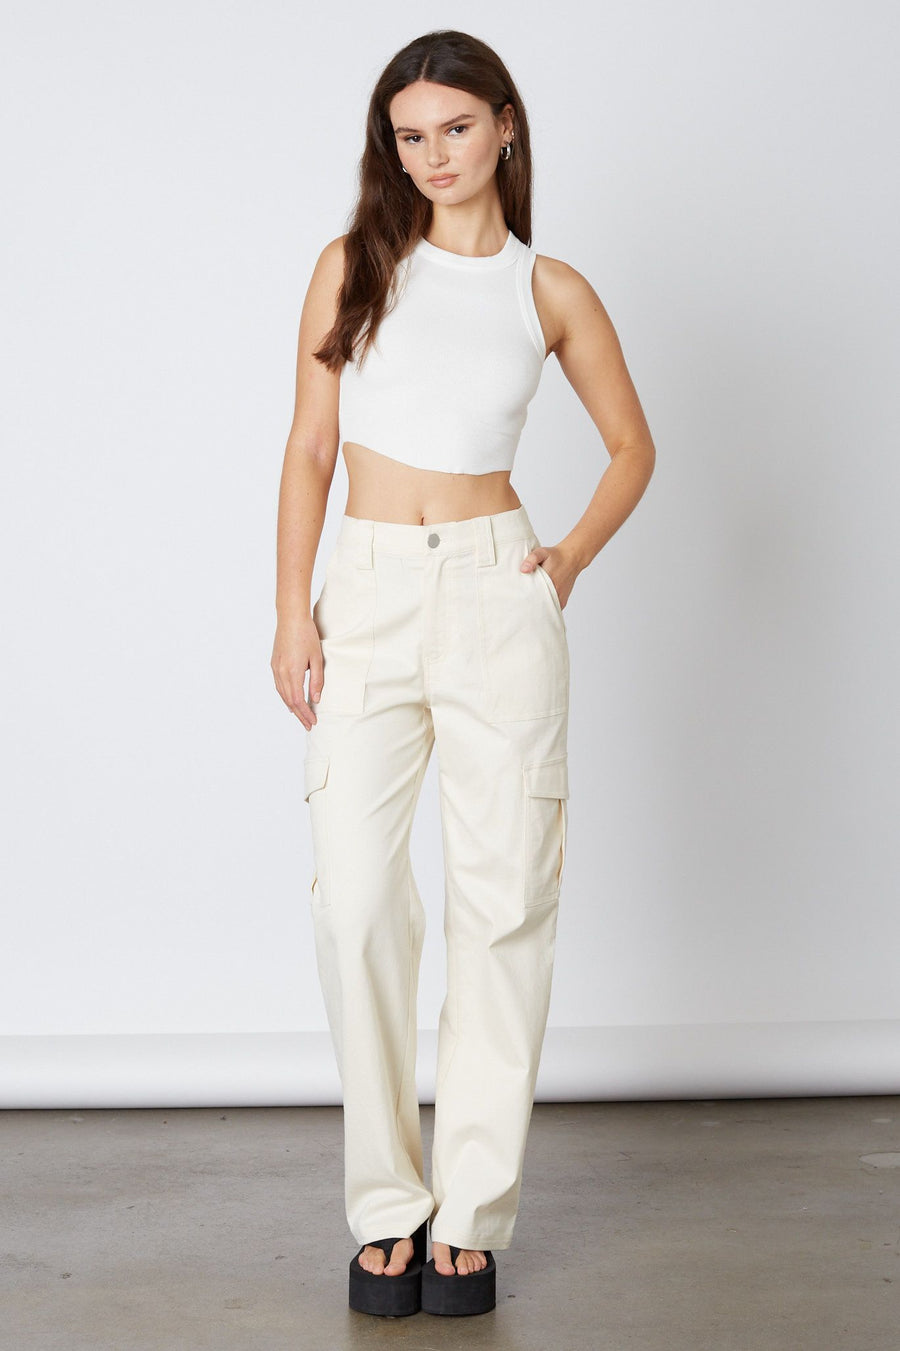 Model is wearing a white tank top with ivory cargo pants and platform flip flops.